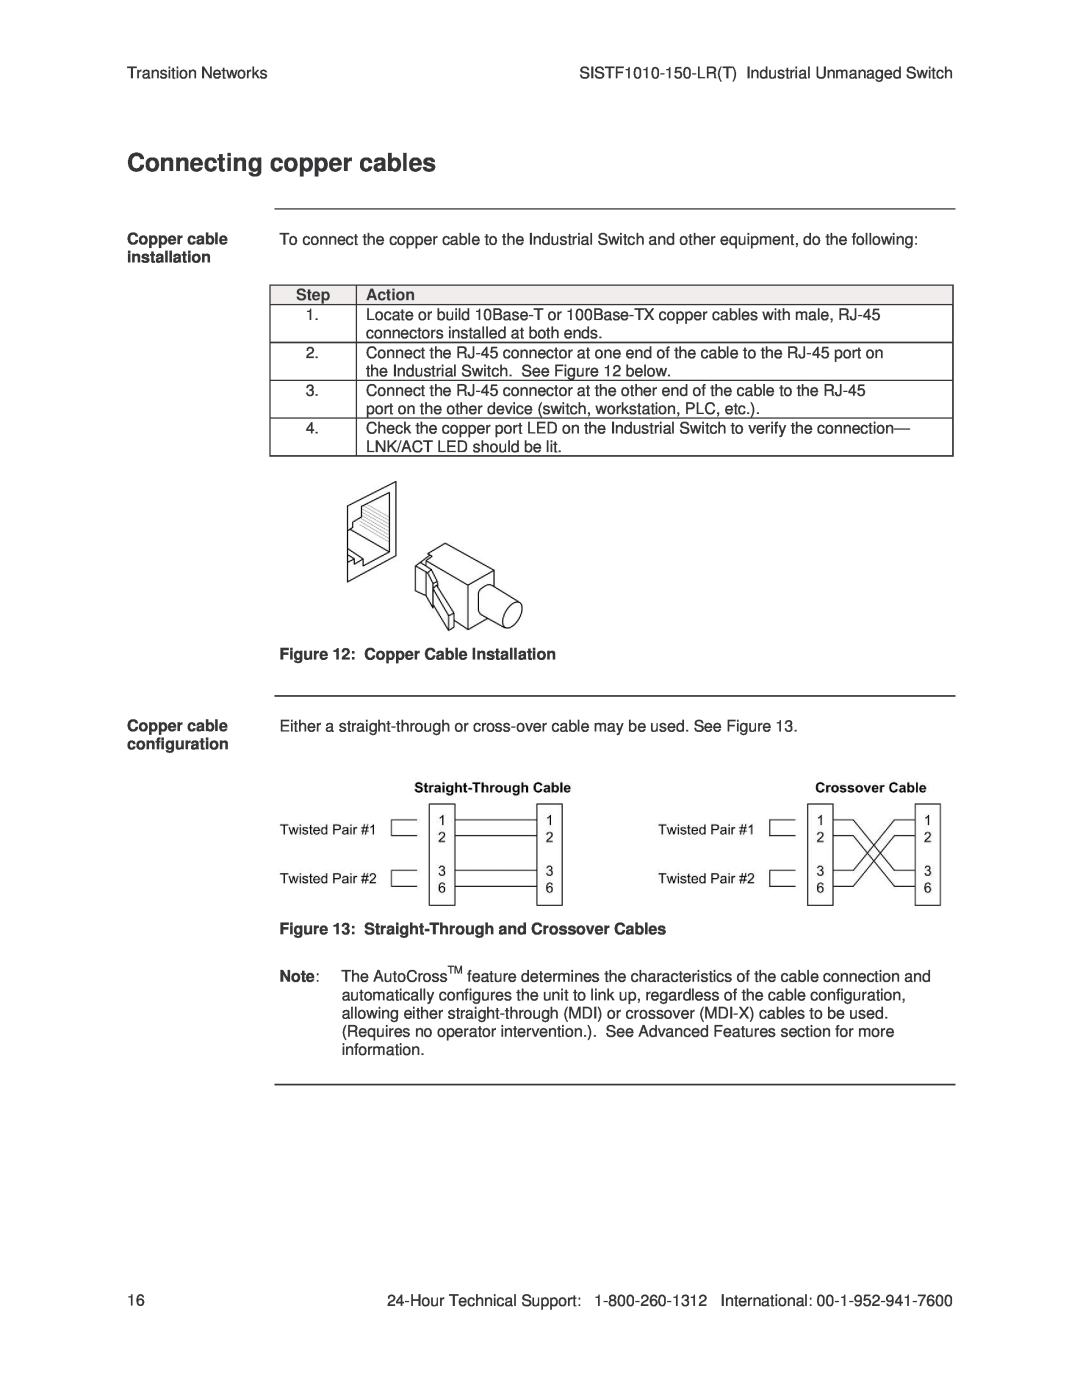 Transition Networks SISTF1010-150-LR(T) installation manual Connecting copper cables 